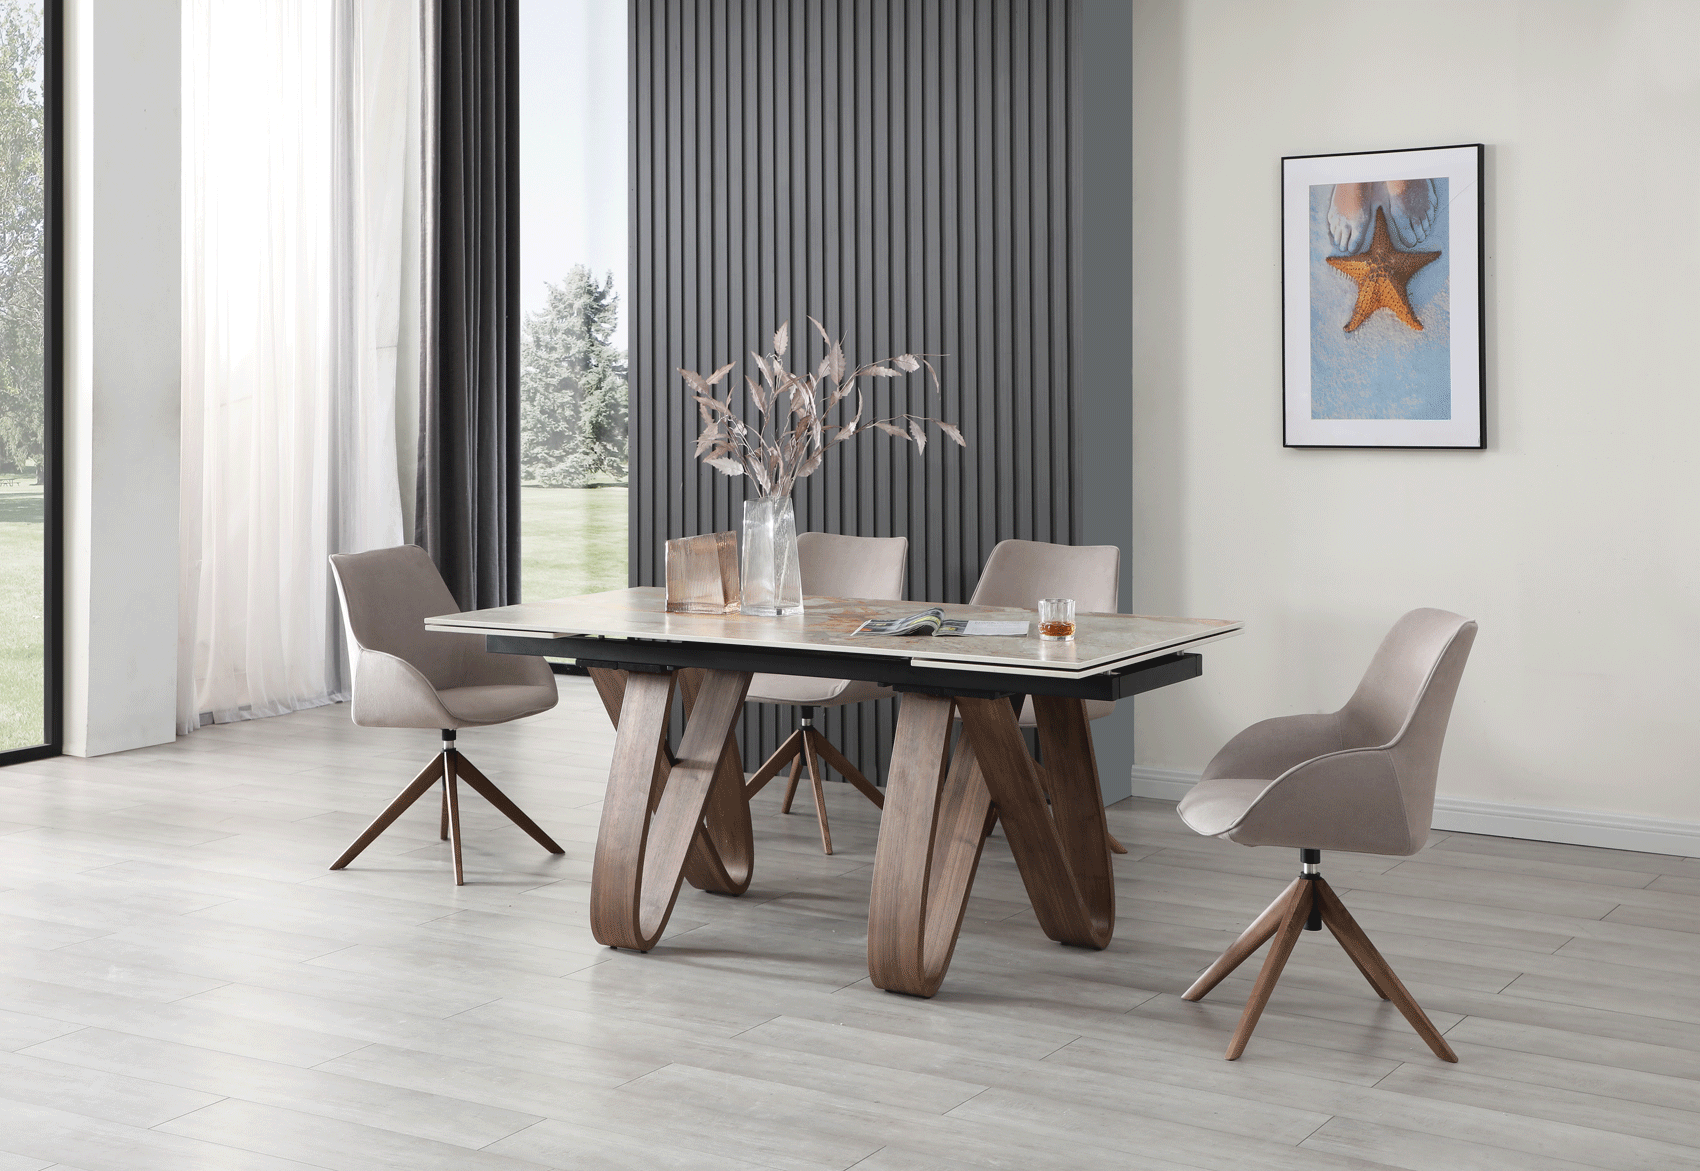 Wallunits Hallway Console tables and Mirrors 9086 Table with 1327 swivel Chairs